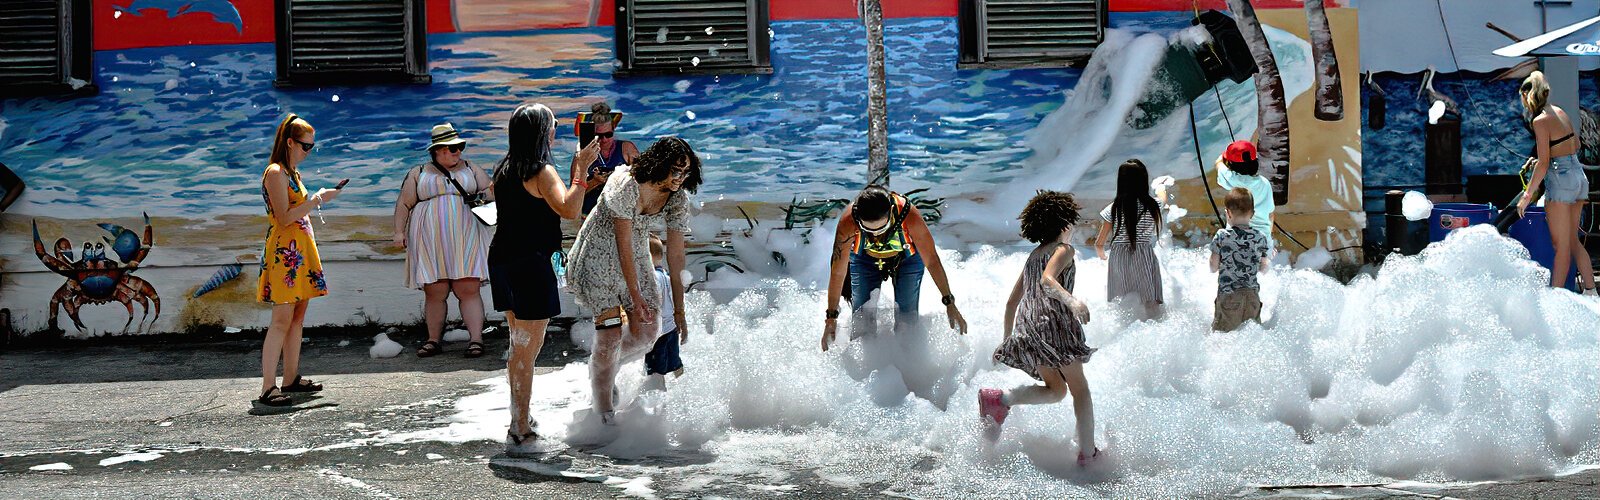 Festival-goers have fun in the foam dispensed by a foam-making machine during the St. Pete Pride Street Festival in late June.